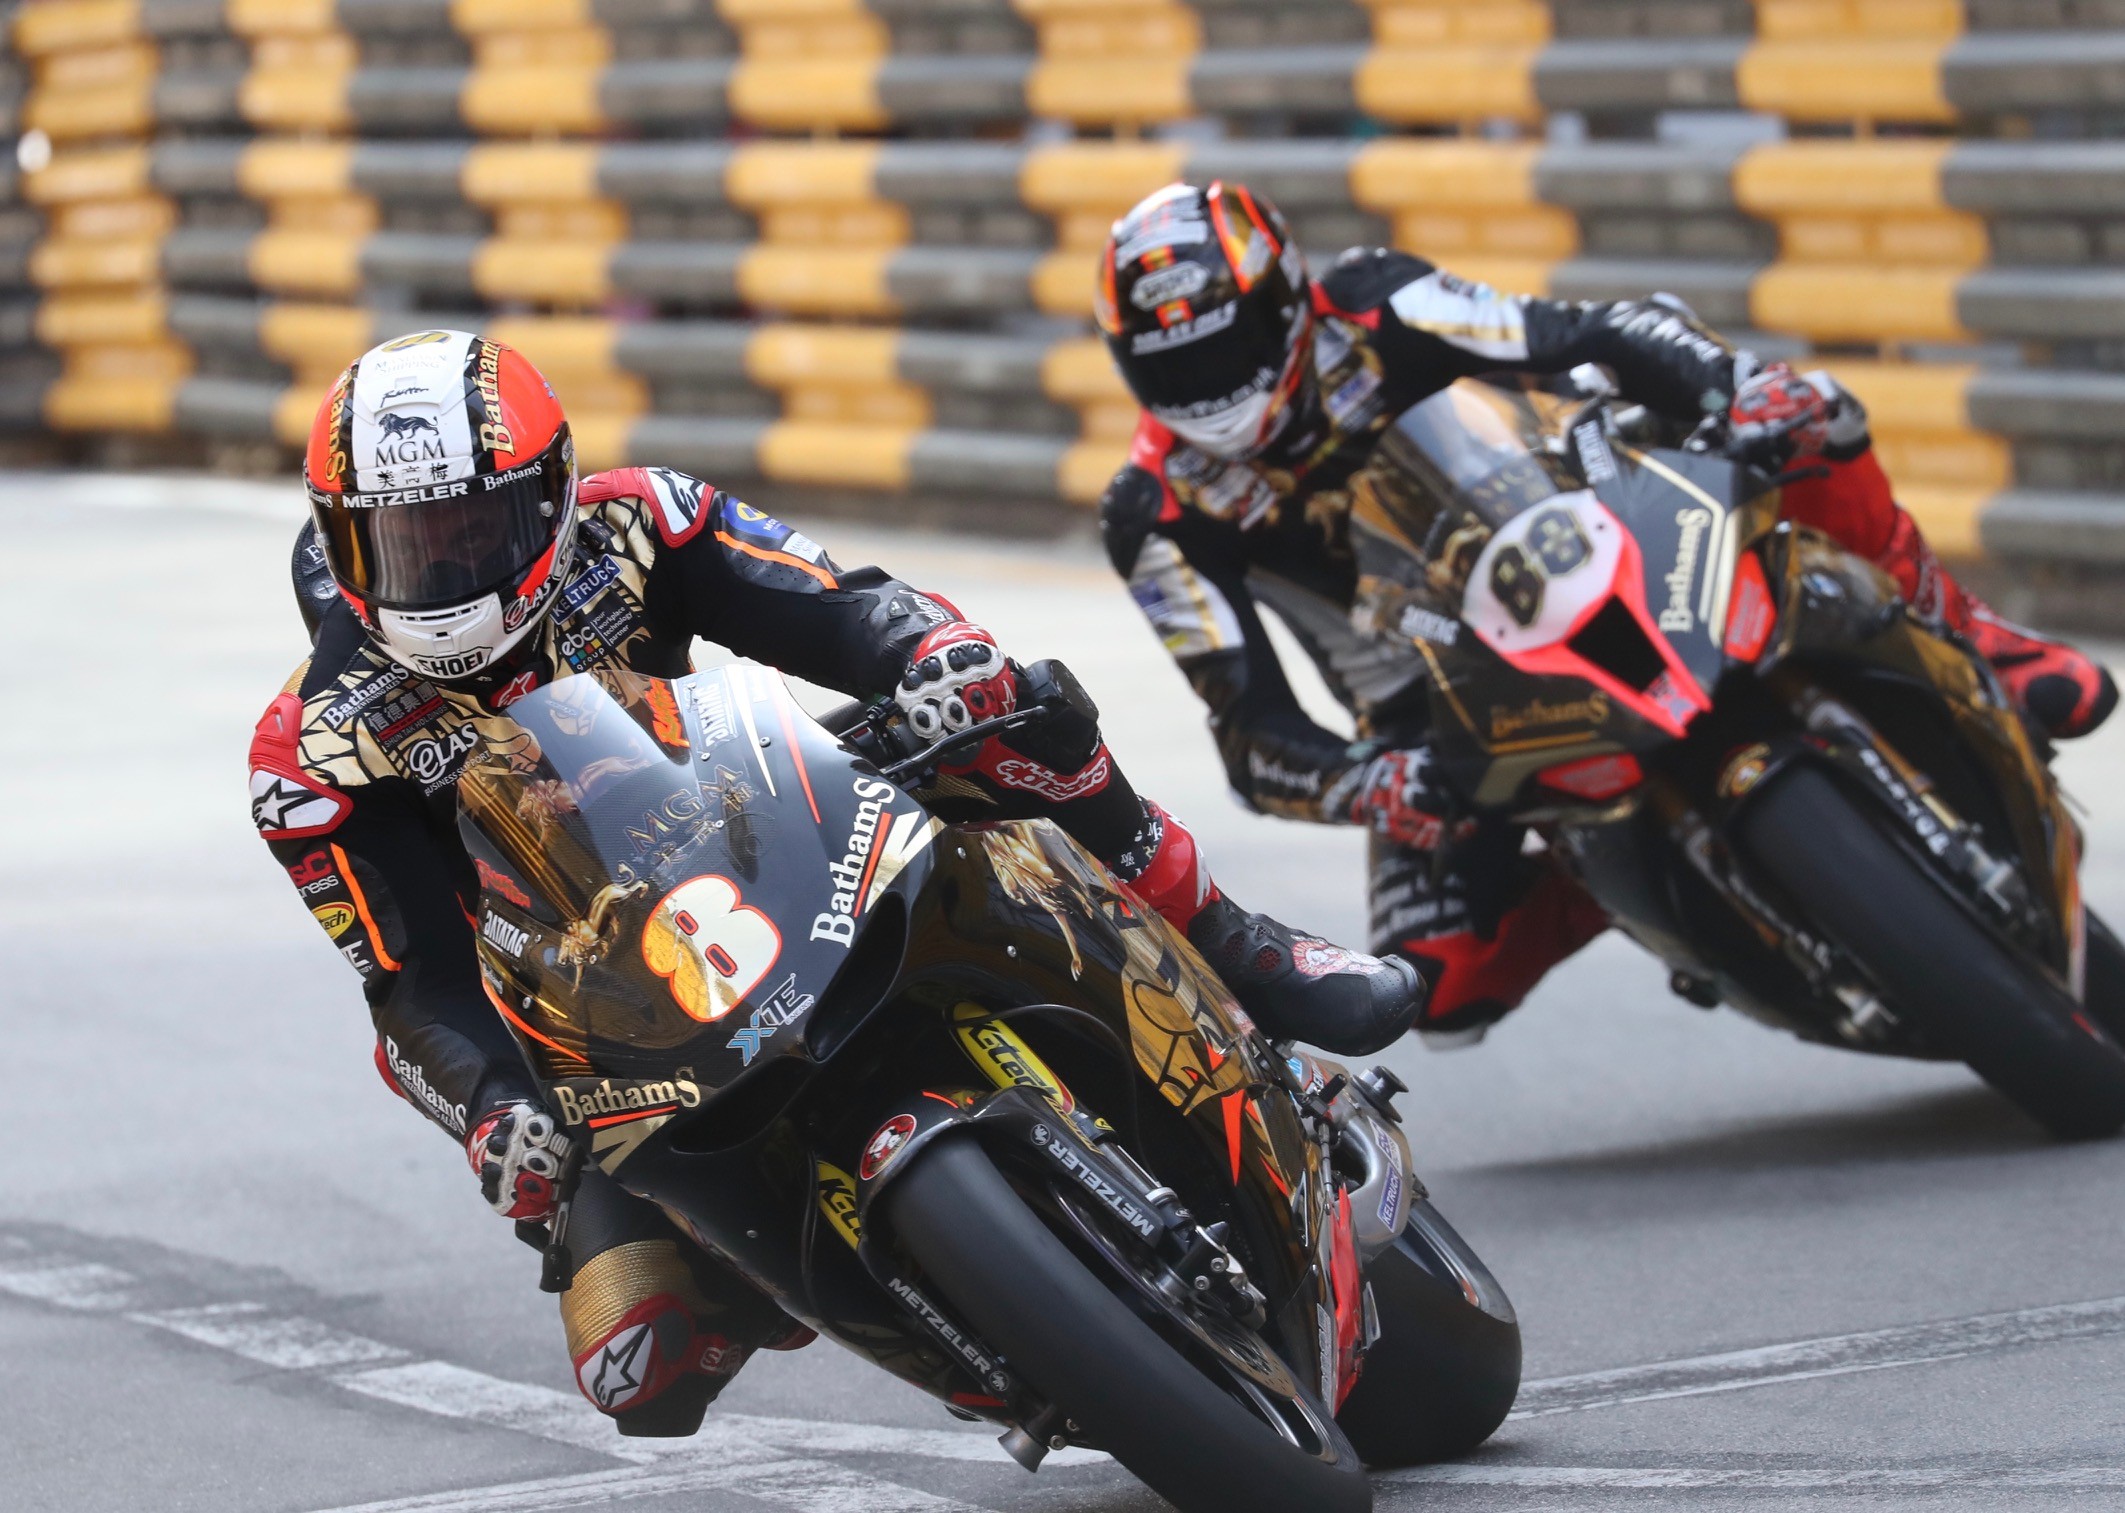 Michael Rutter (No 8) leading Peter Hickman in the Macau Motorcycle Grand Prix. Photo: K. Y. Cheng